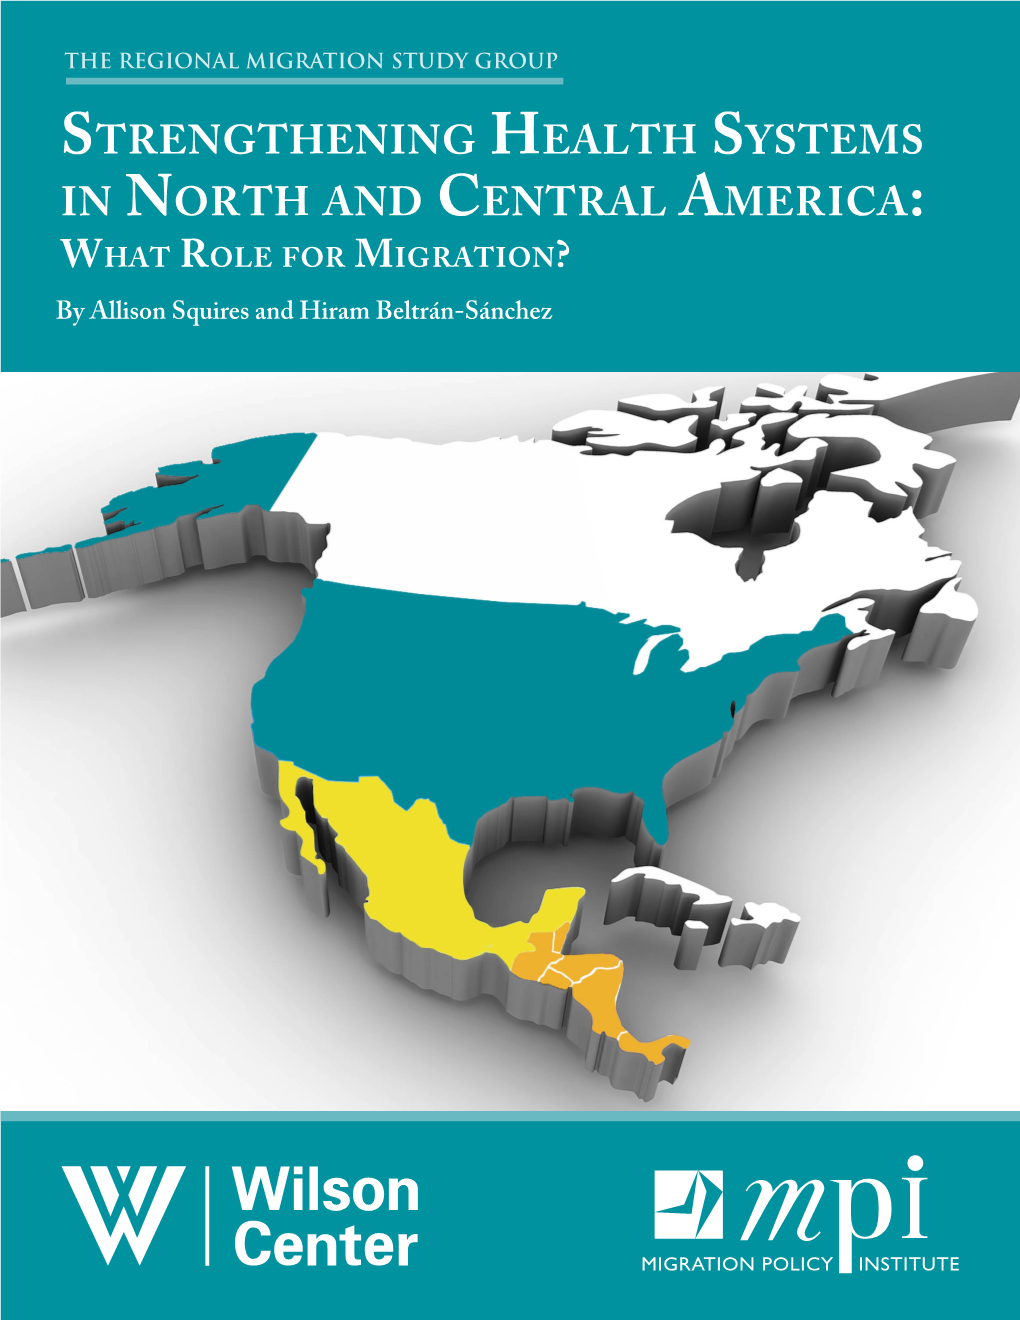 Strengthening Health Systems in North and Central America: What Role for Migration? by Allison Squires and Hiram Beltrán-Sánchez the REGIONAL MIGRATION STUDY GROUP